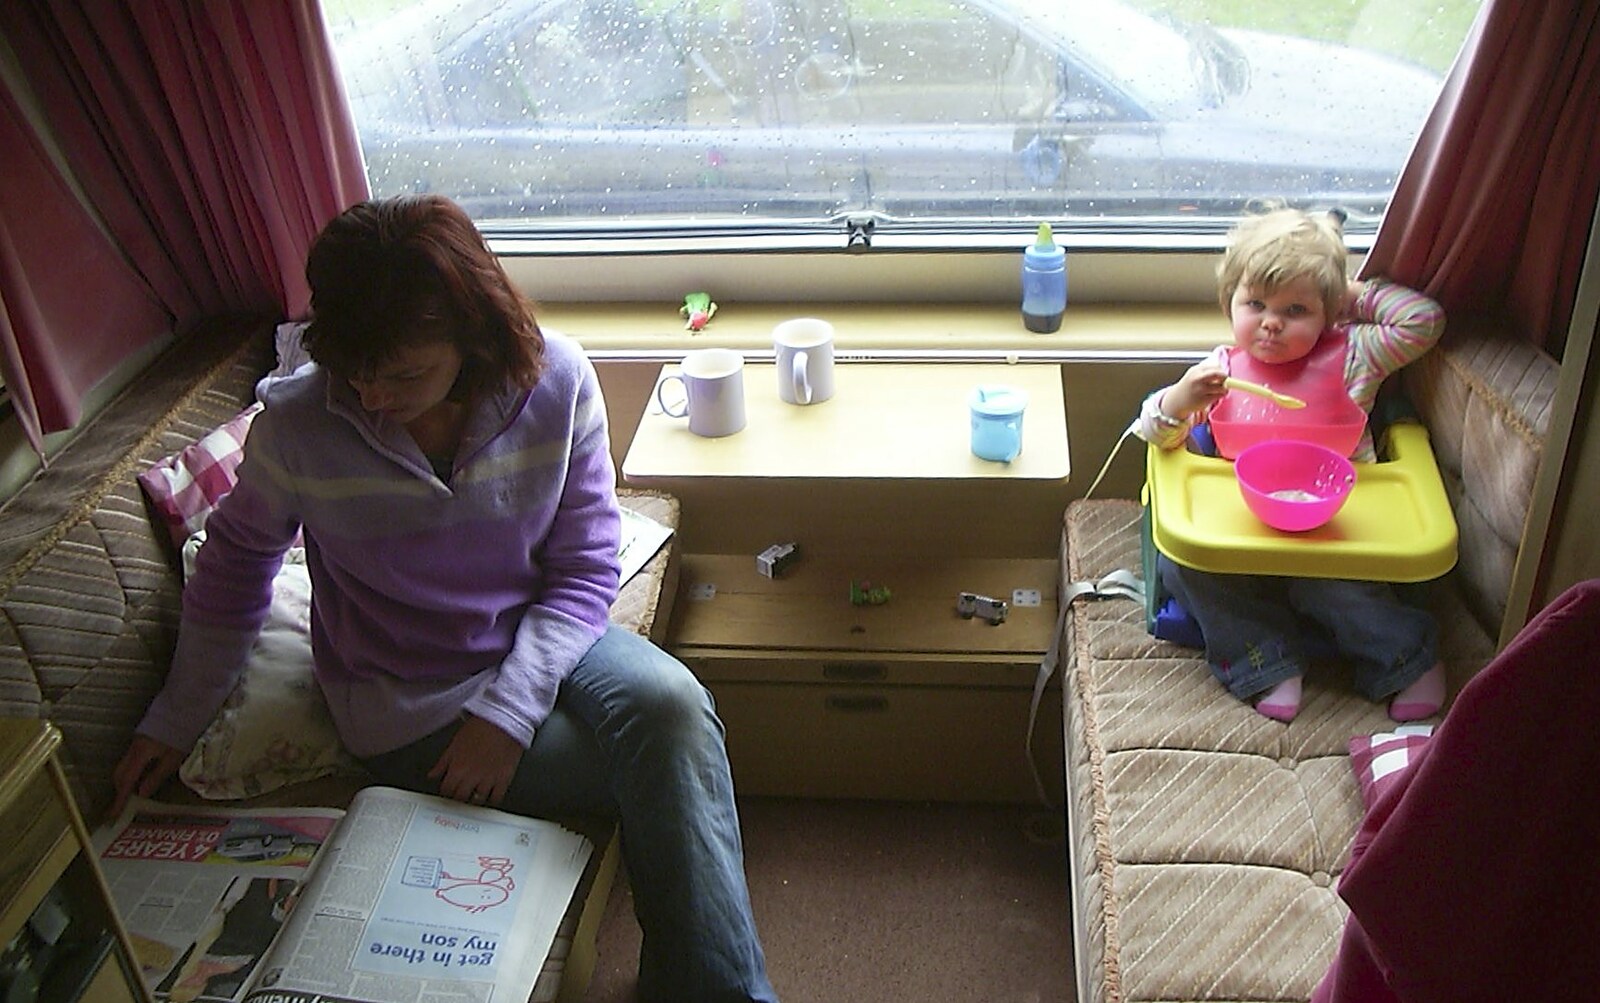 Corfe Castle Camping, Corfe, Dorset - 30th May 2004: Michelle and Sydney in the caravan